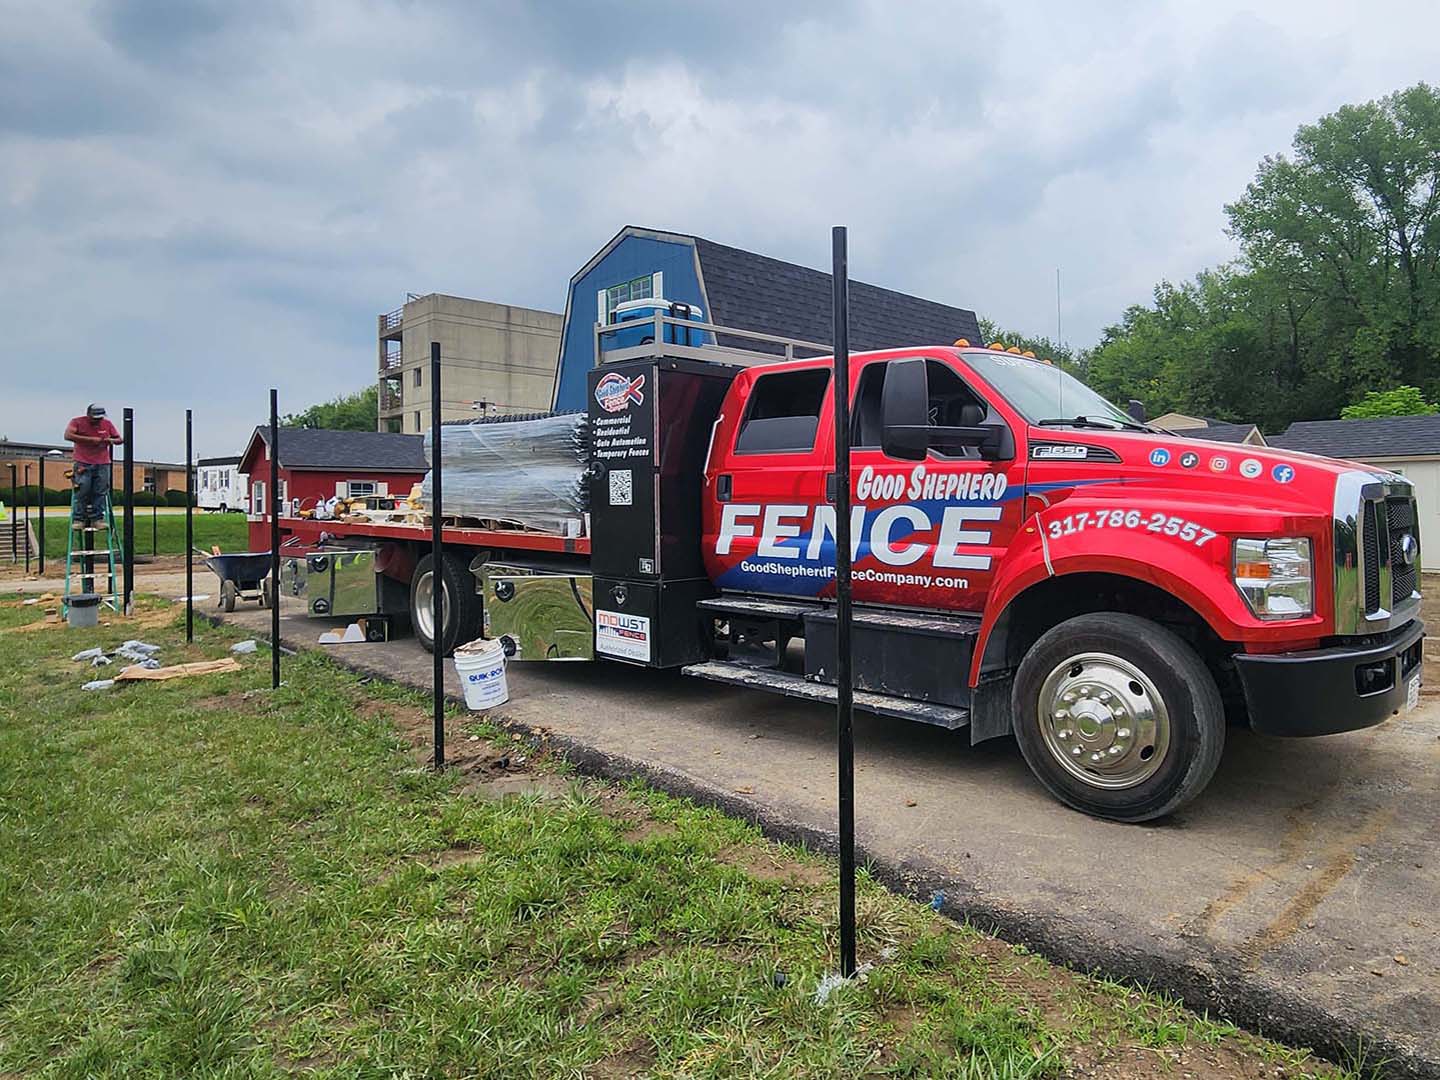 No dig fence installation company in the Indianapolis Indiana area